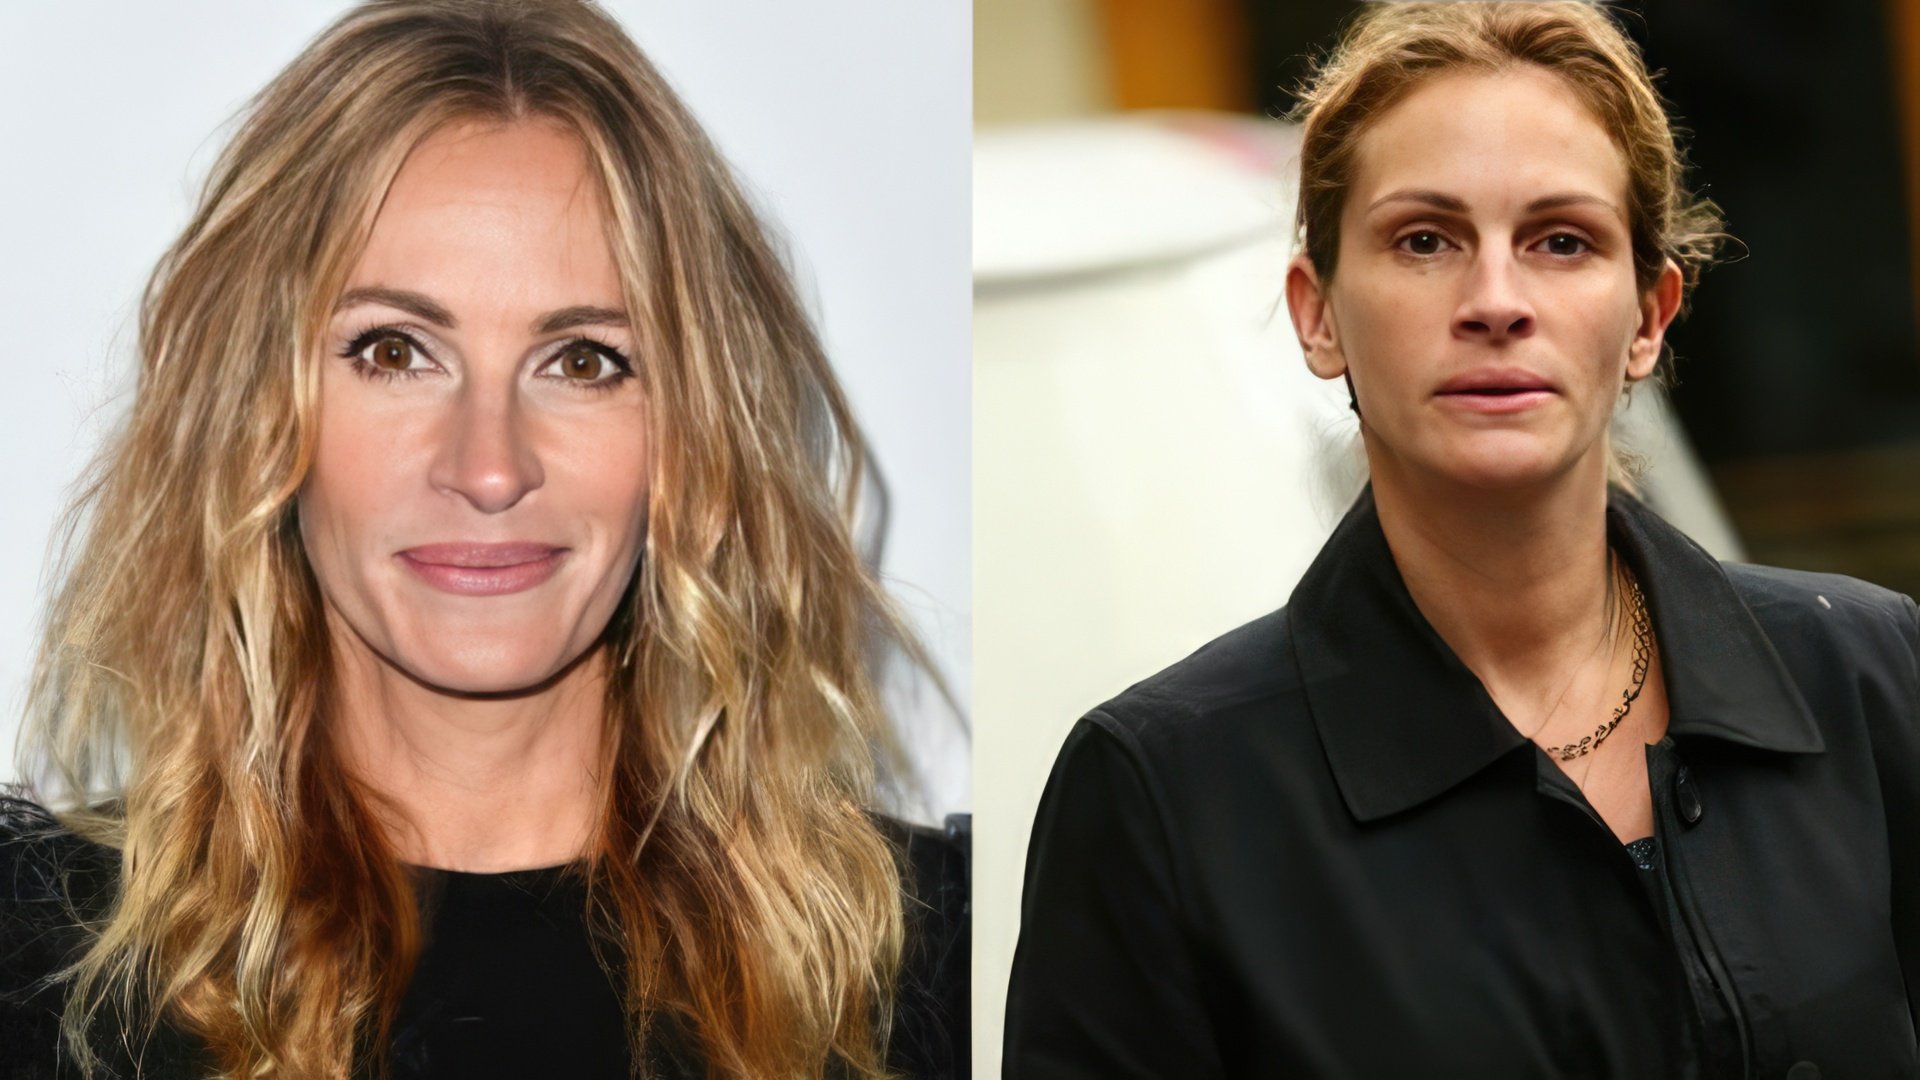 On the right: Julia Roberts without makeup